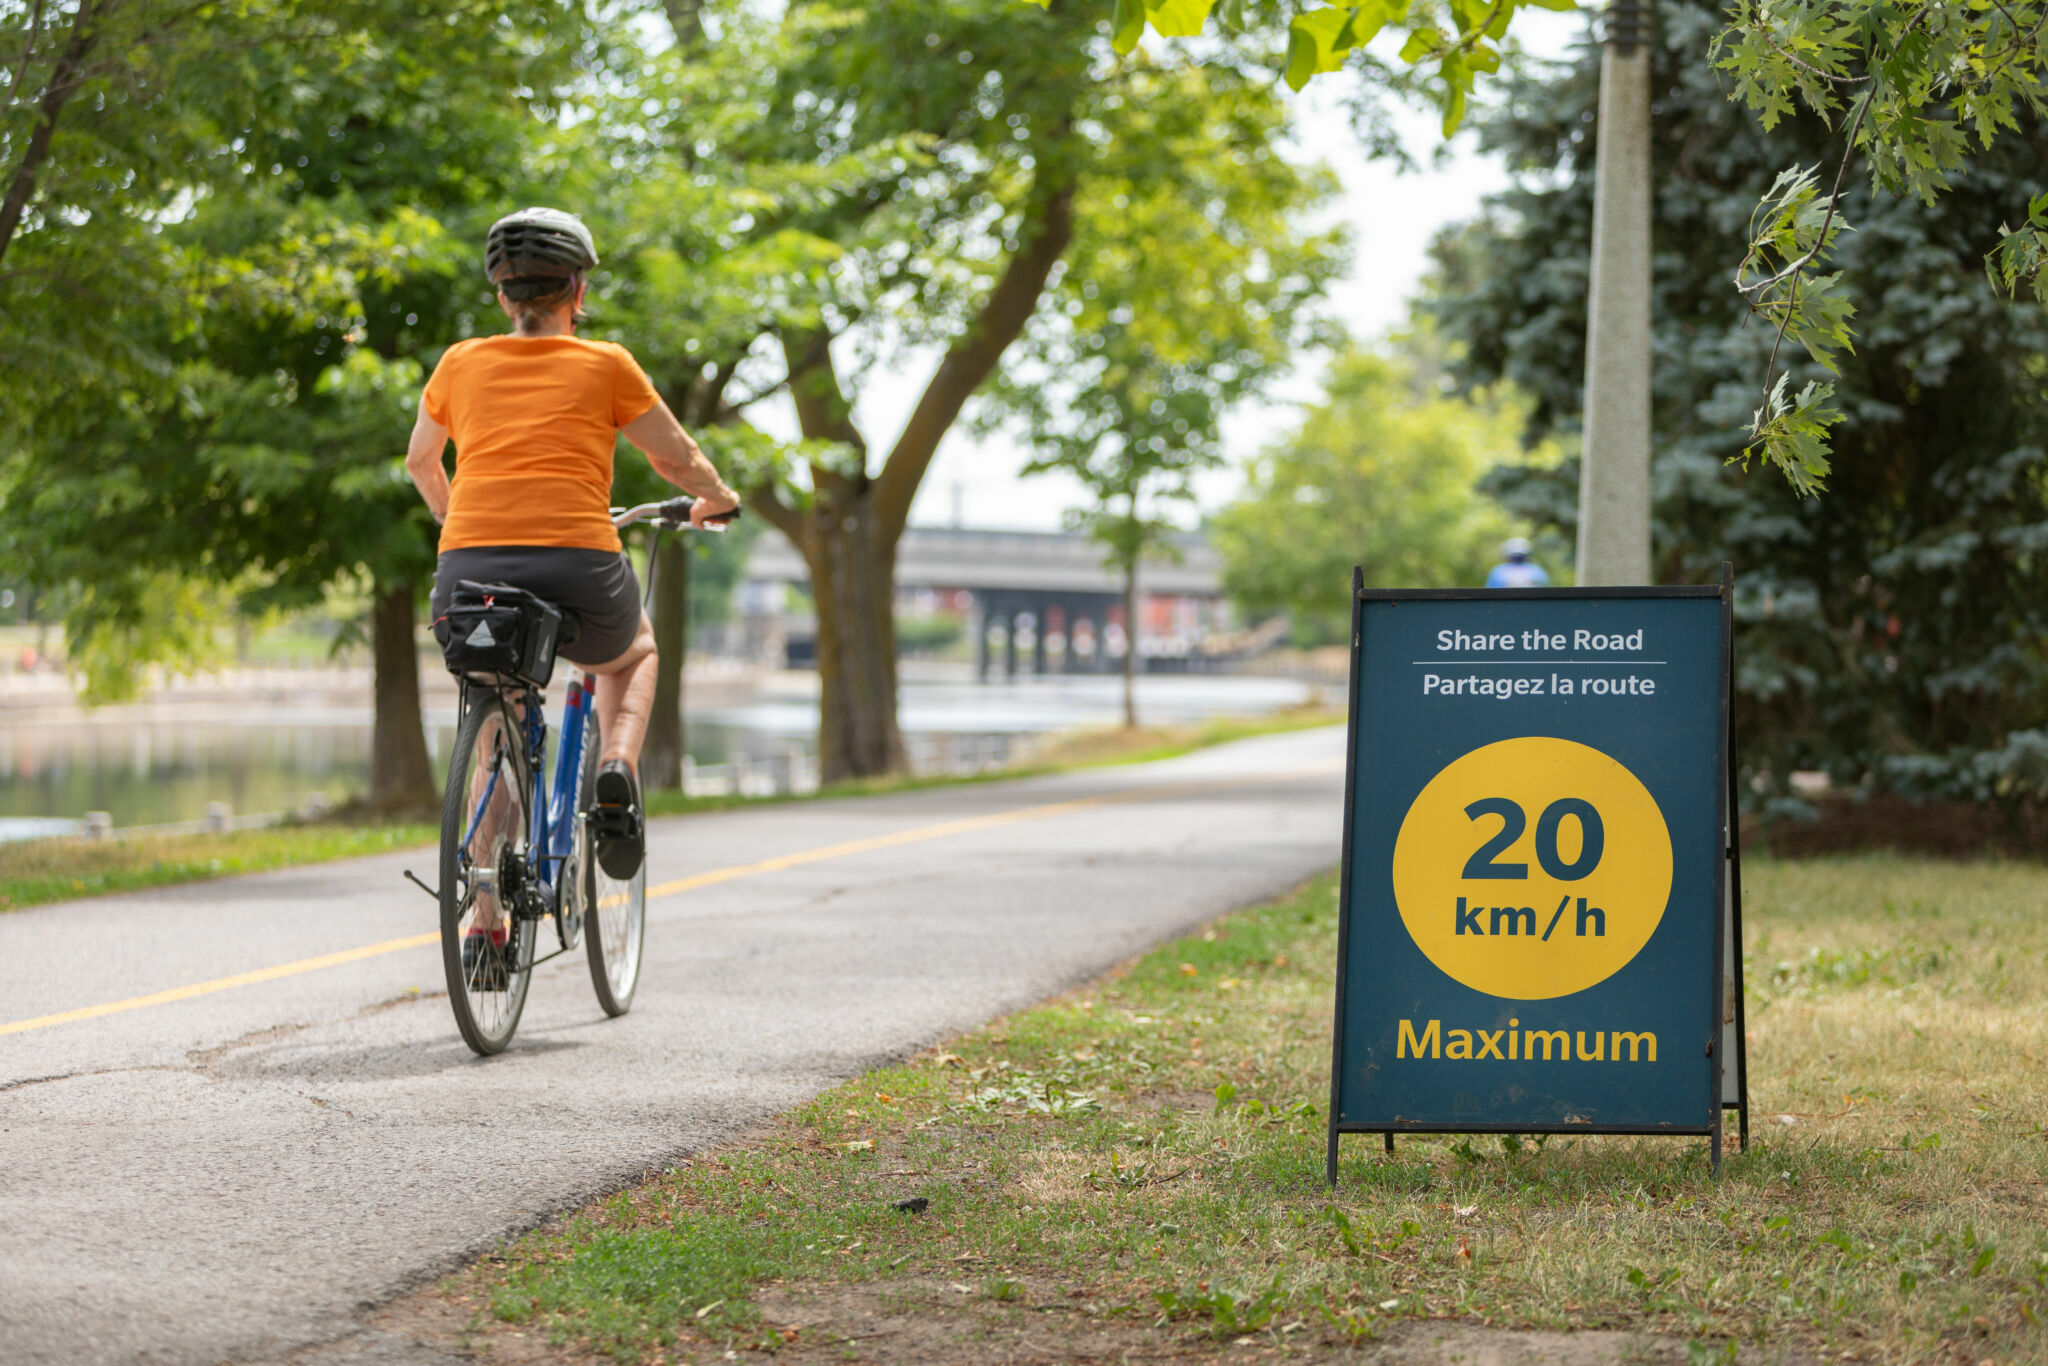 Cyclist on the Capital Pathway, passing a sign with the message “Share the road, 20 km/h maximum.”